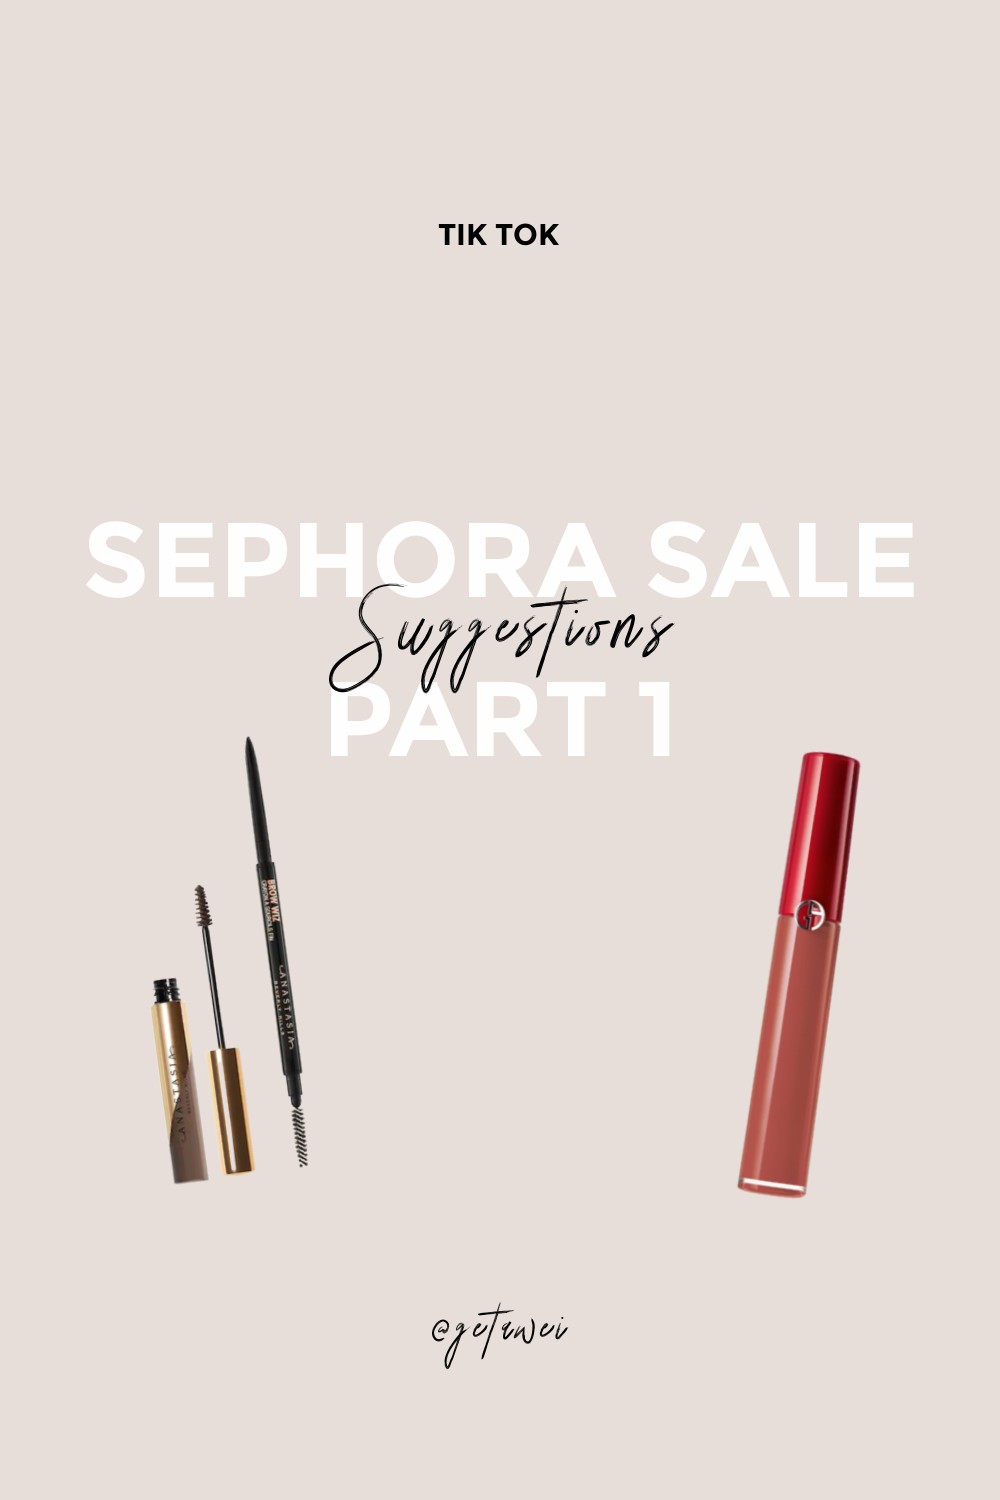 SEPHORA SALE SUGGESTIONS PART 1 LISAWEI